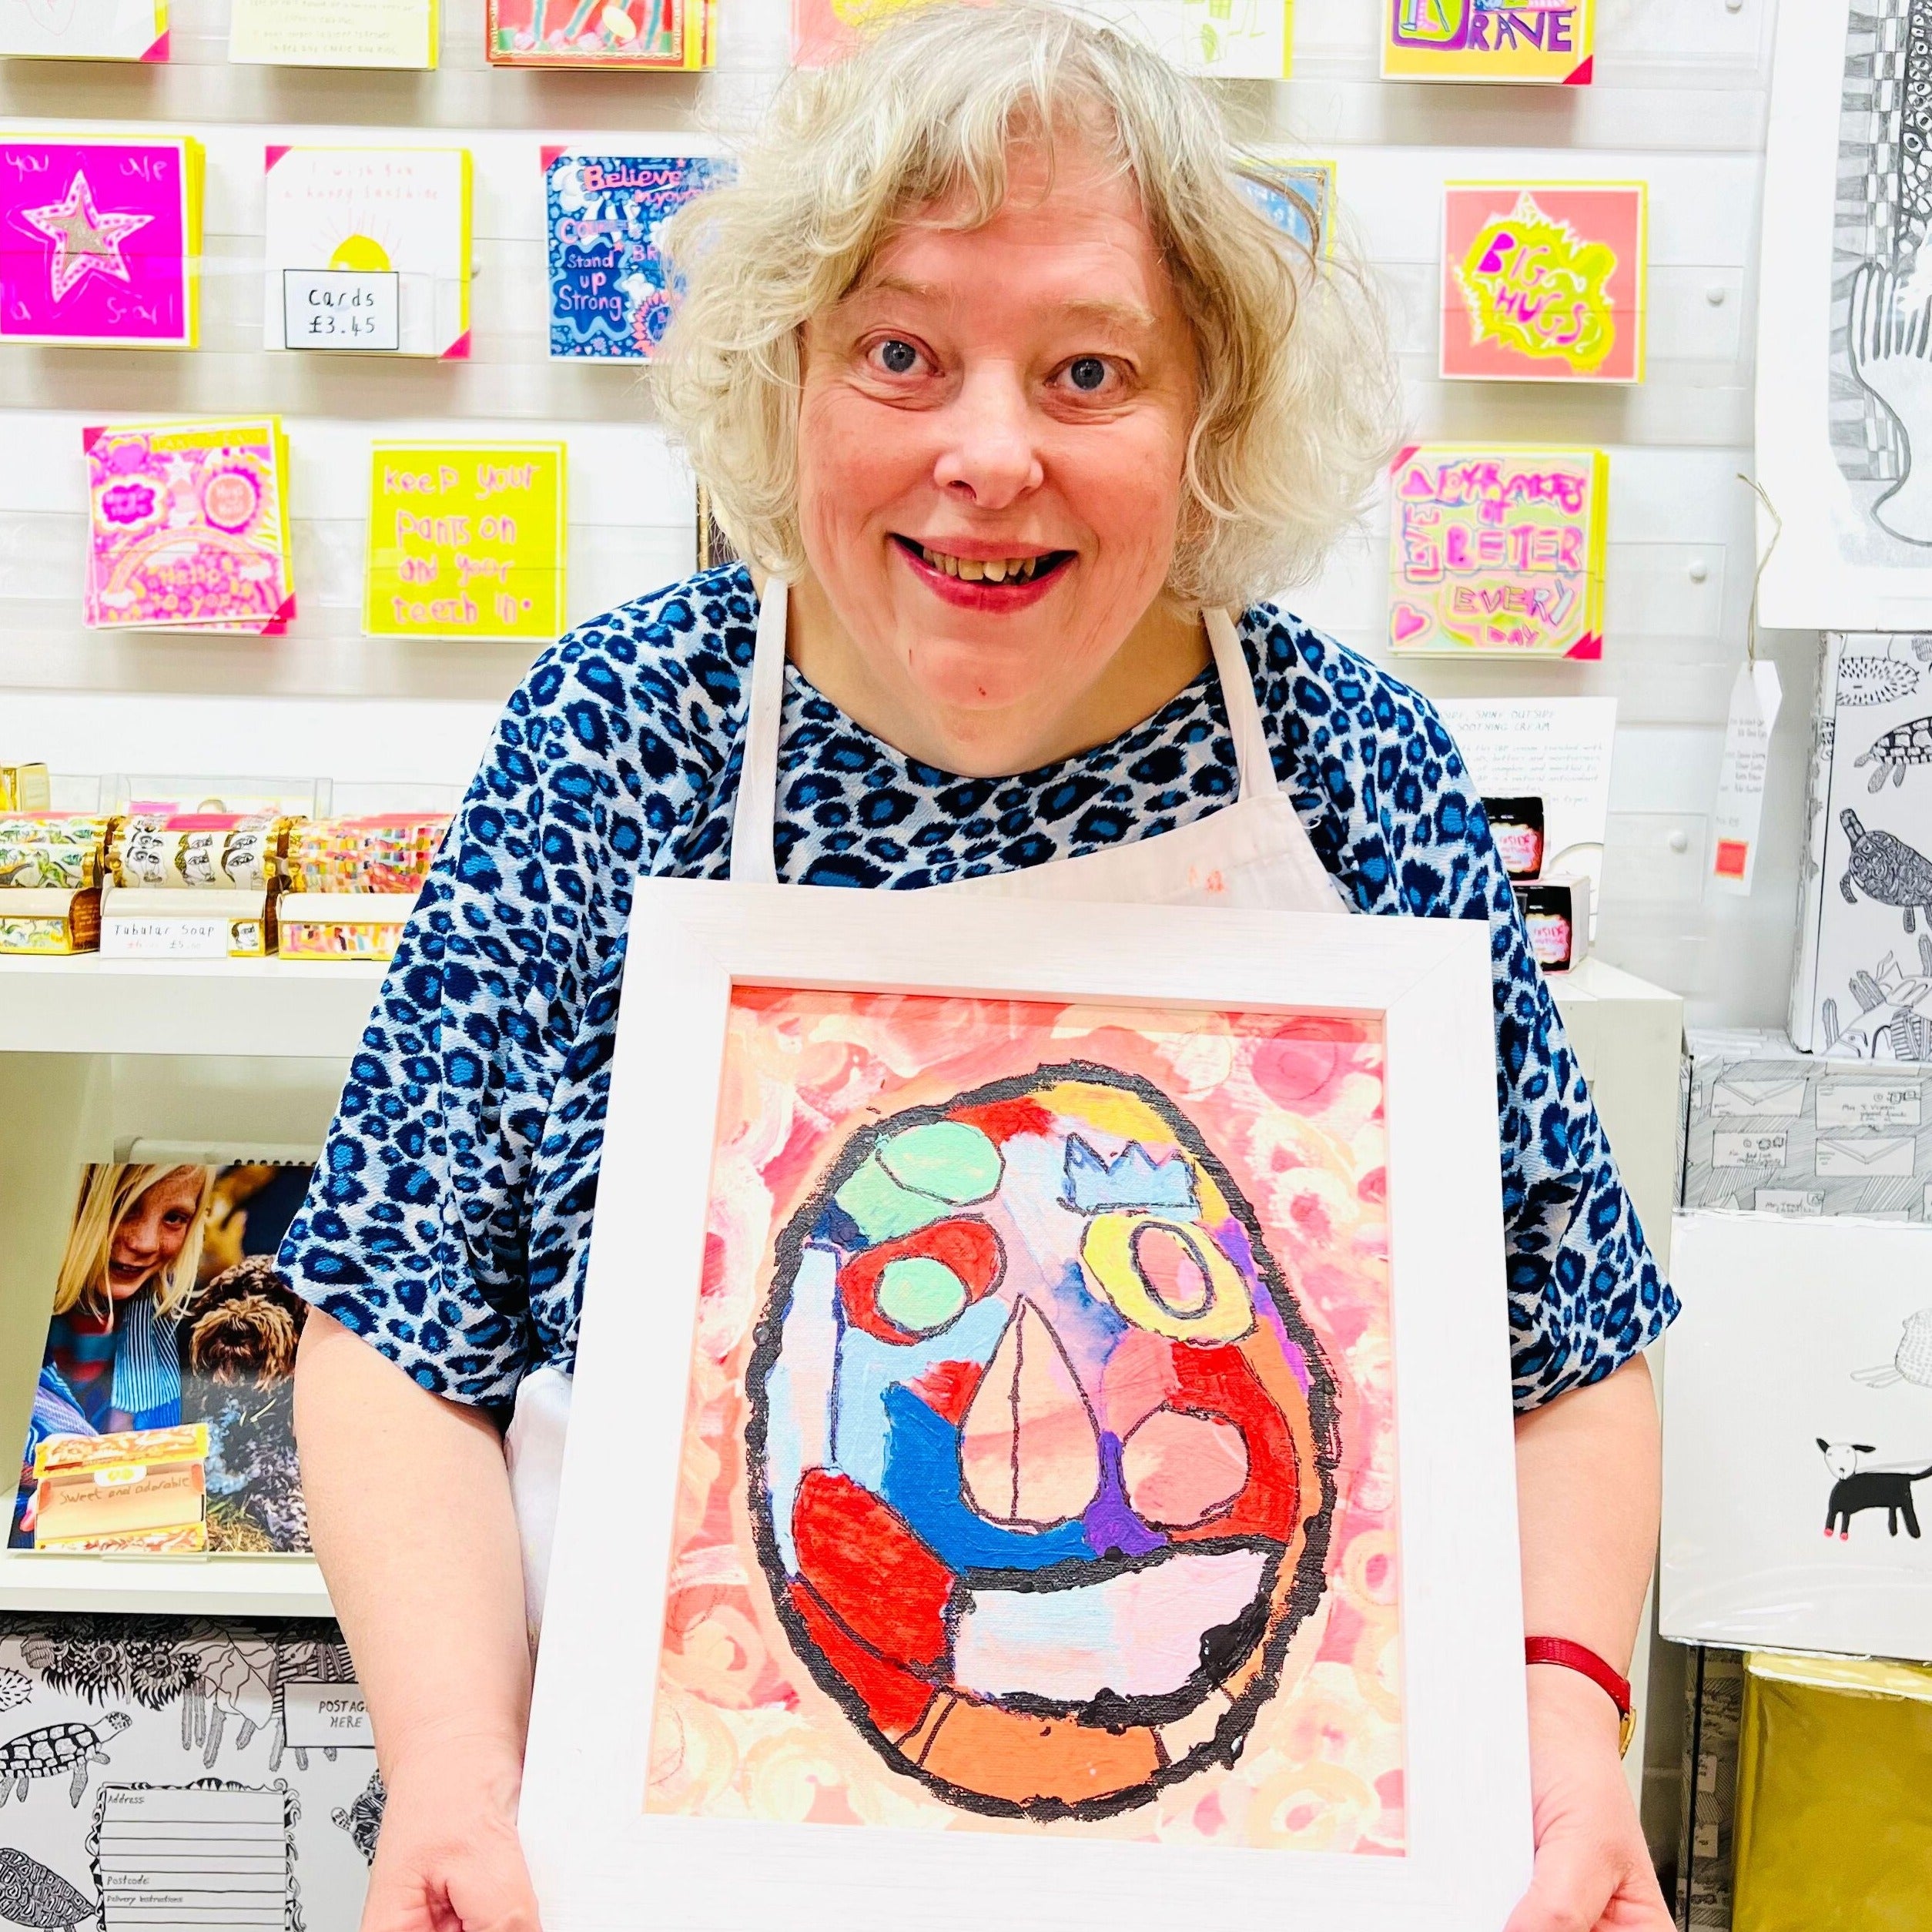 Female artist holding Framed painting of a bright coloured mask 